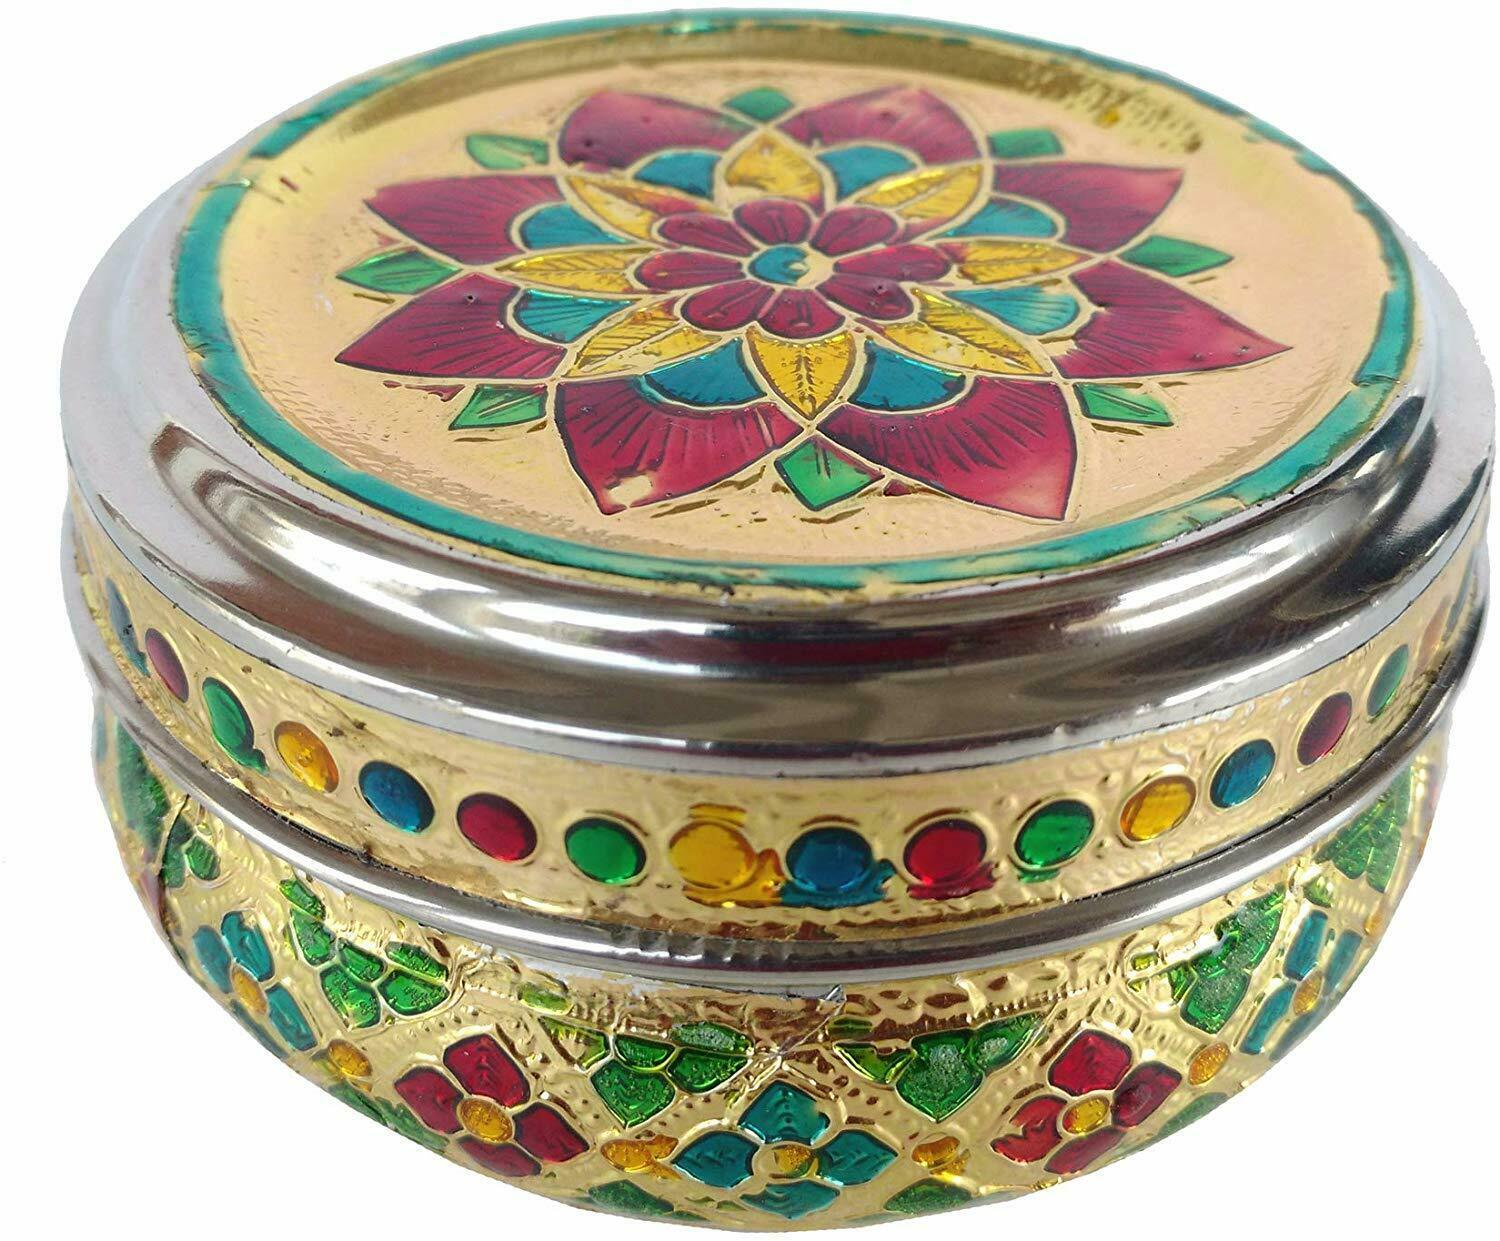 Meena Worked Small Stainless steel Flower design food storage box easy carry - $14.16